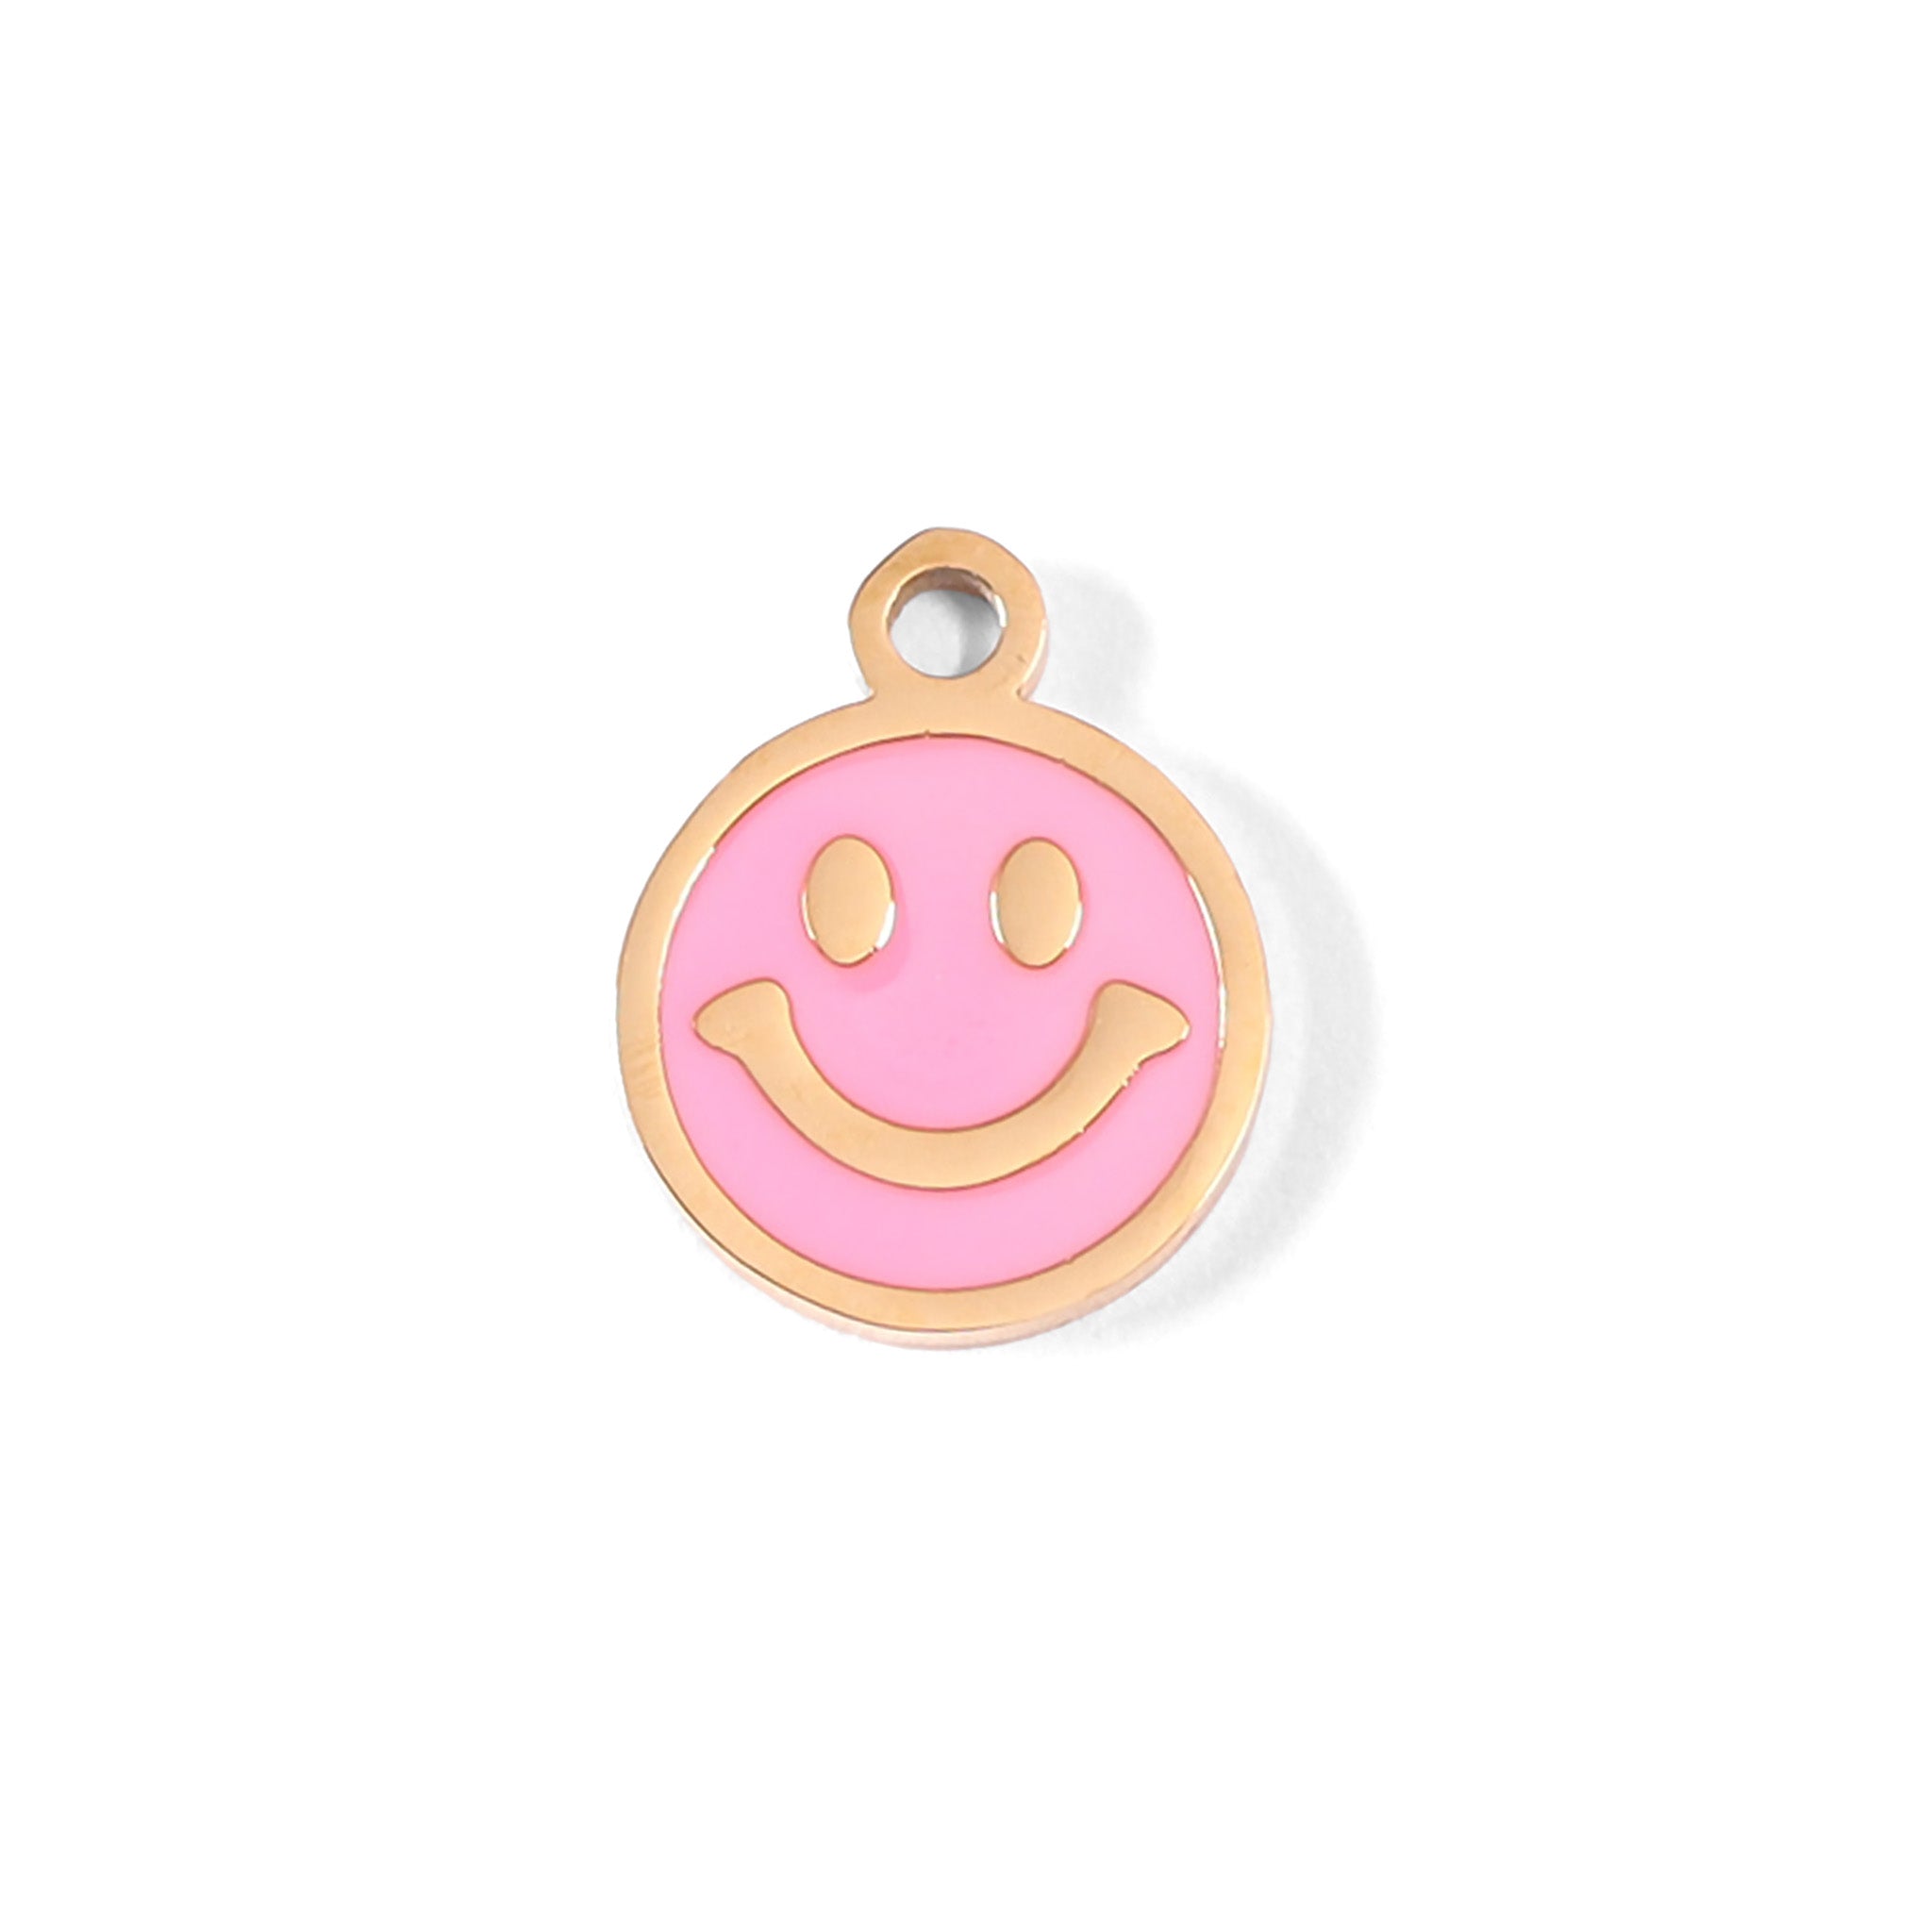 18K Gold PVD Stainless Steel Epoxy Pink Smiley Face Charm / PDL0005